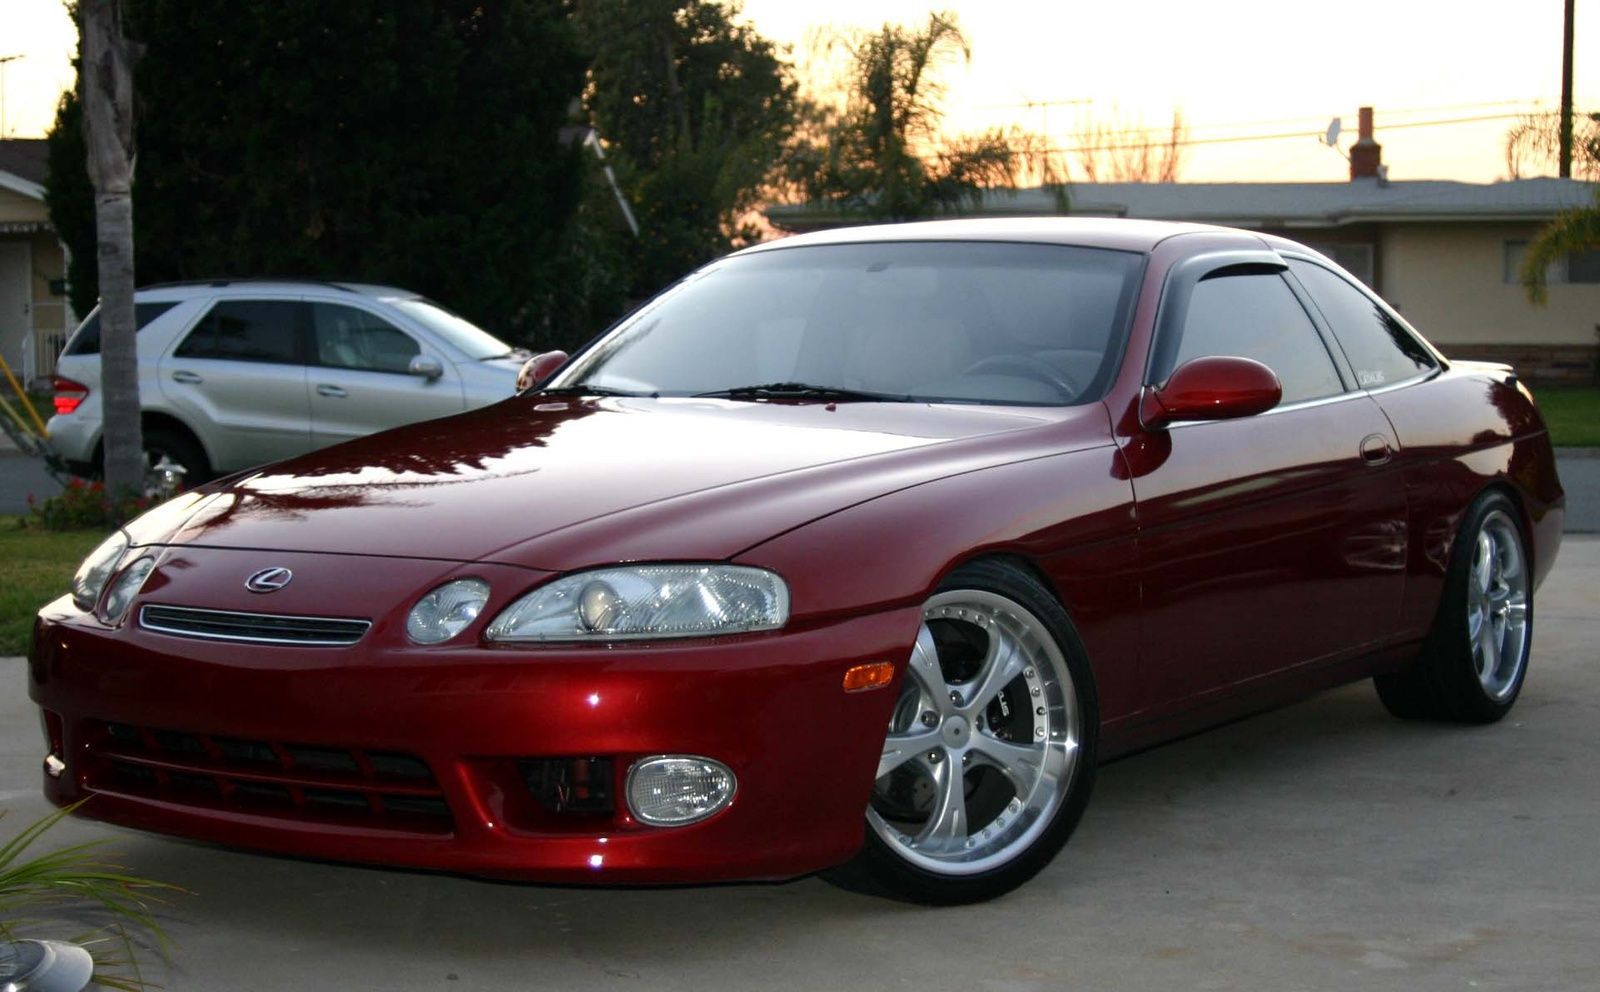 1997 Lexus SC400: The luxury sports car that makes a great project car.